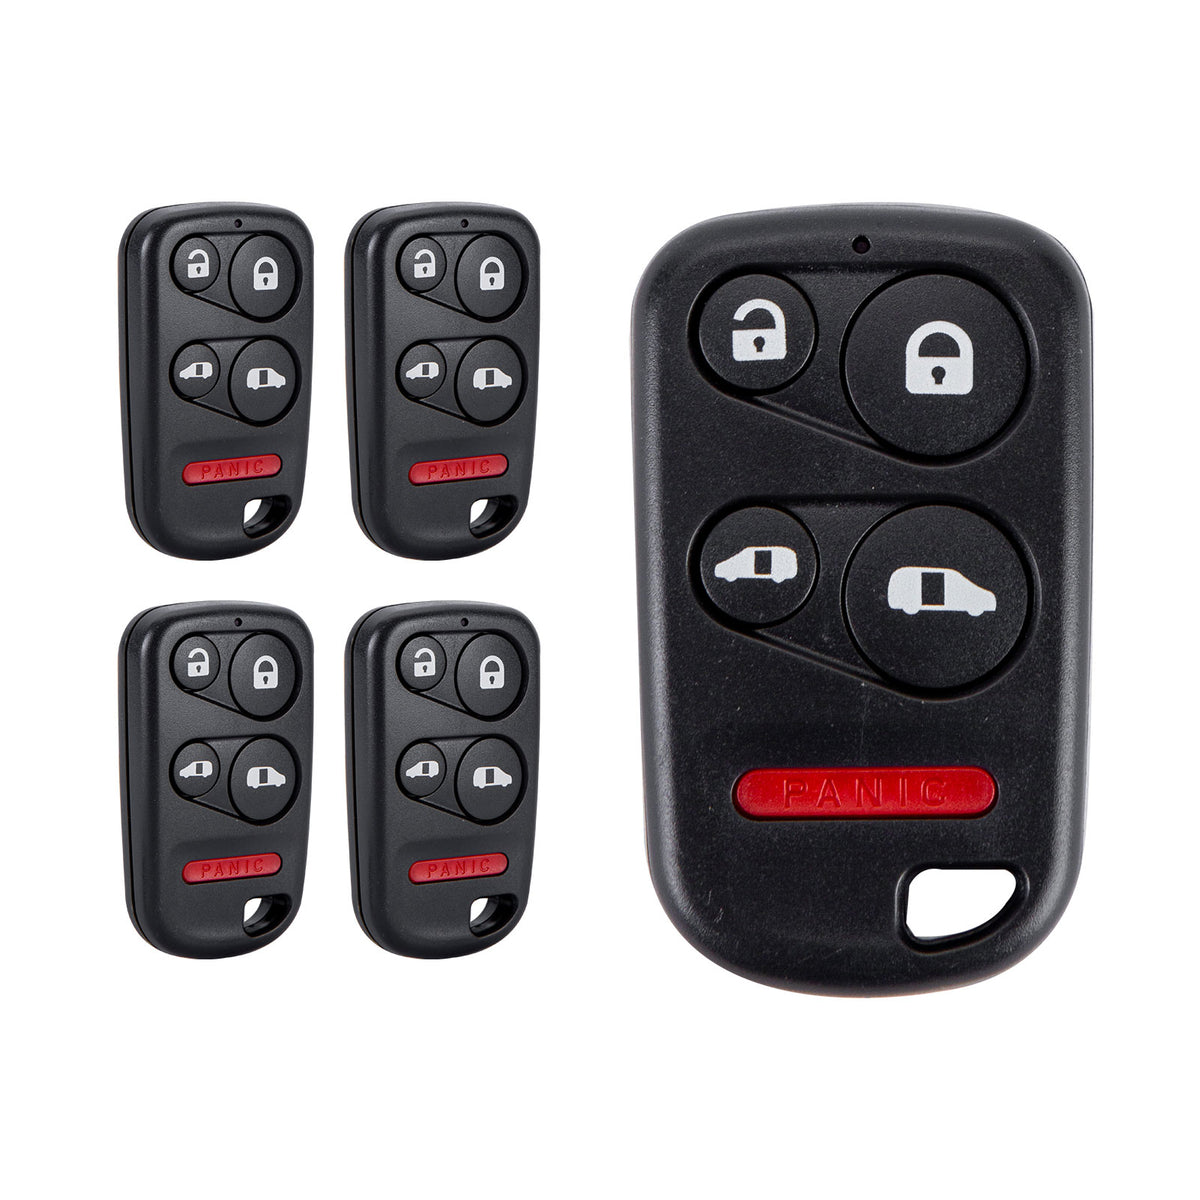 Lots of 5 Car Remote Fob Replacement for OUCG8D-440H-A fits 2001 2002 2003 2004 Honda Odyssey